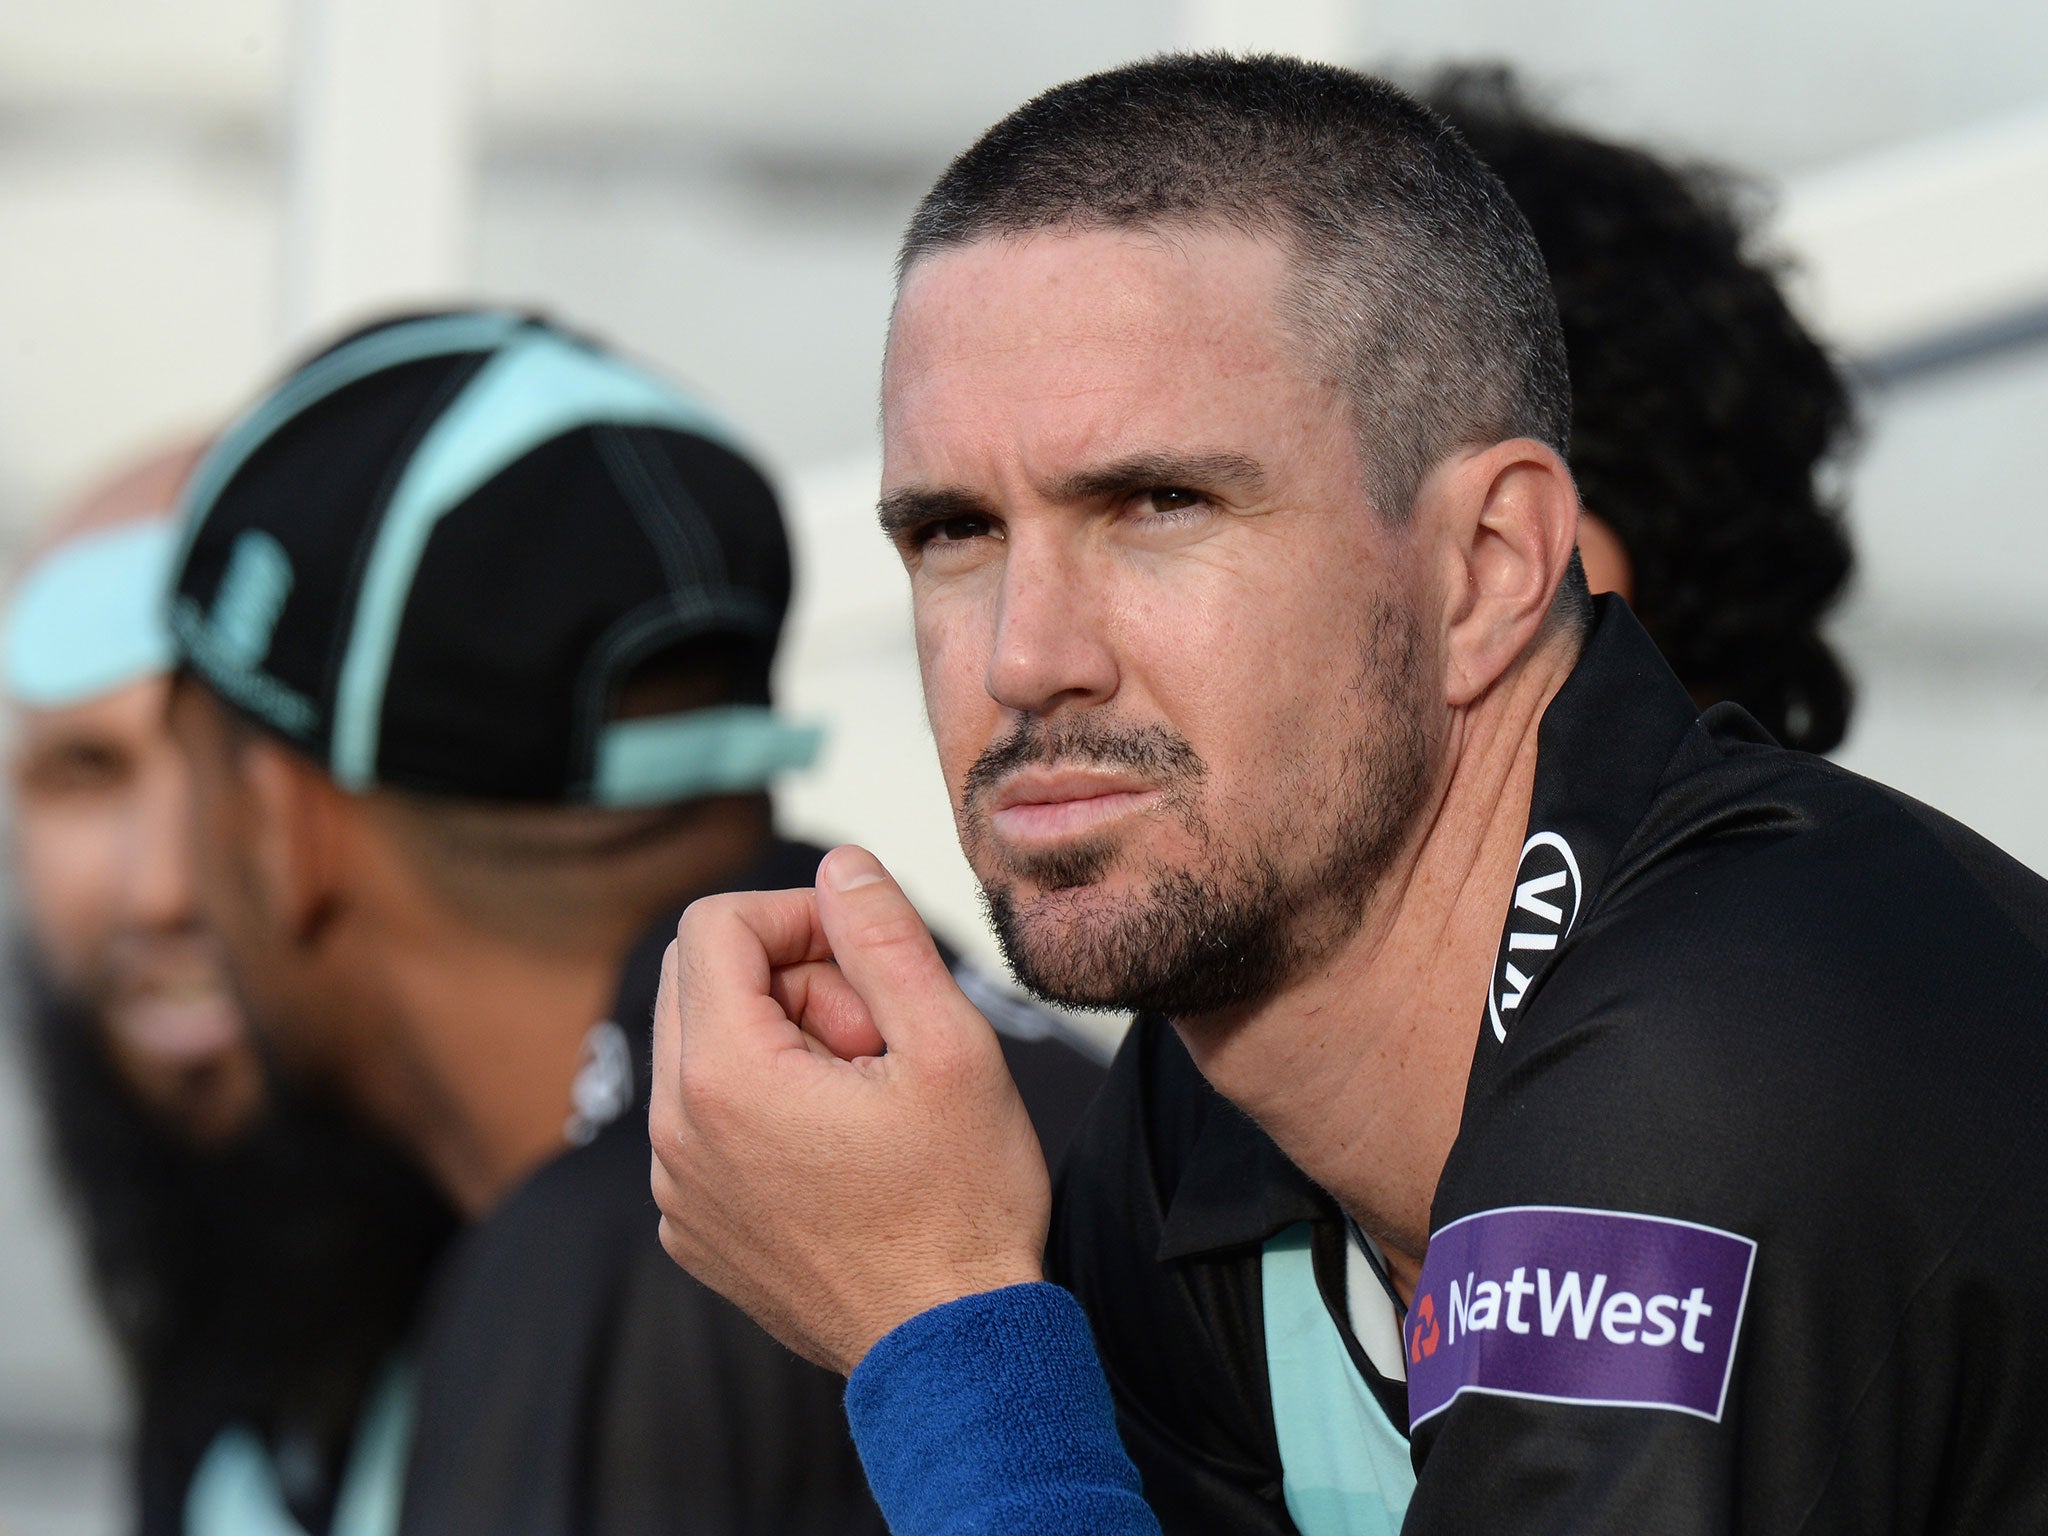 Kevin Pietersen of Surrey sitting on the bench after his innings during the NatWest T20 Blast match between Surrey and Essex Eagles